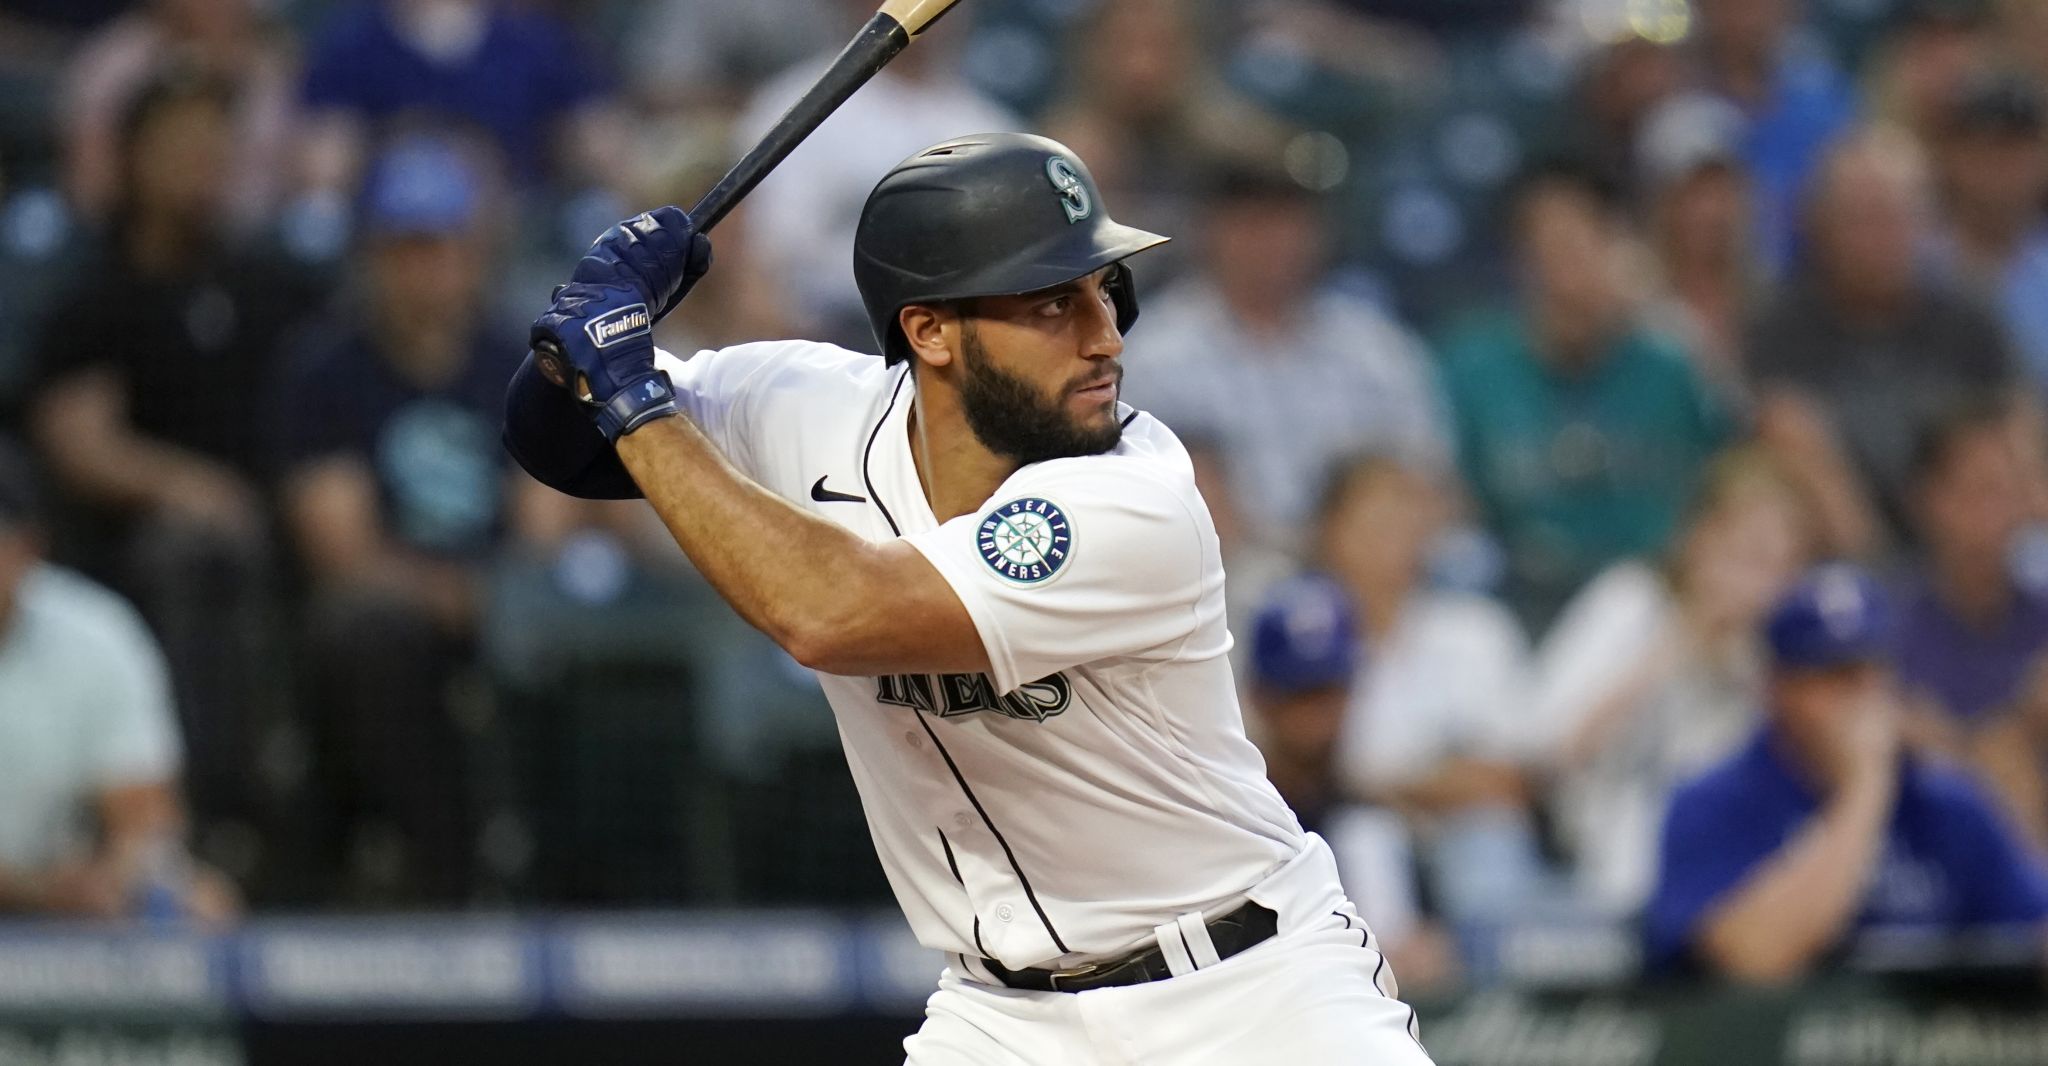 Abraham Toro finding stability with Mariners